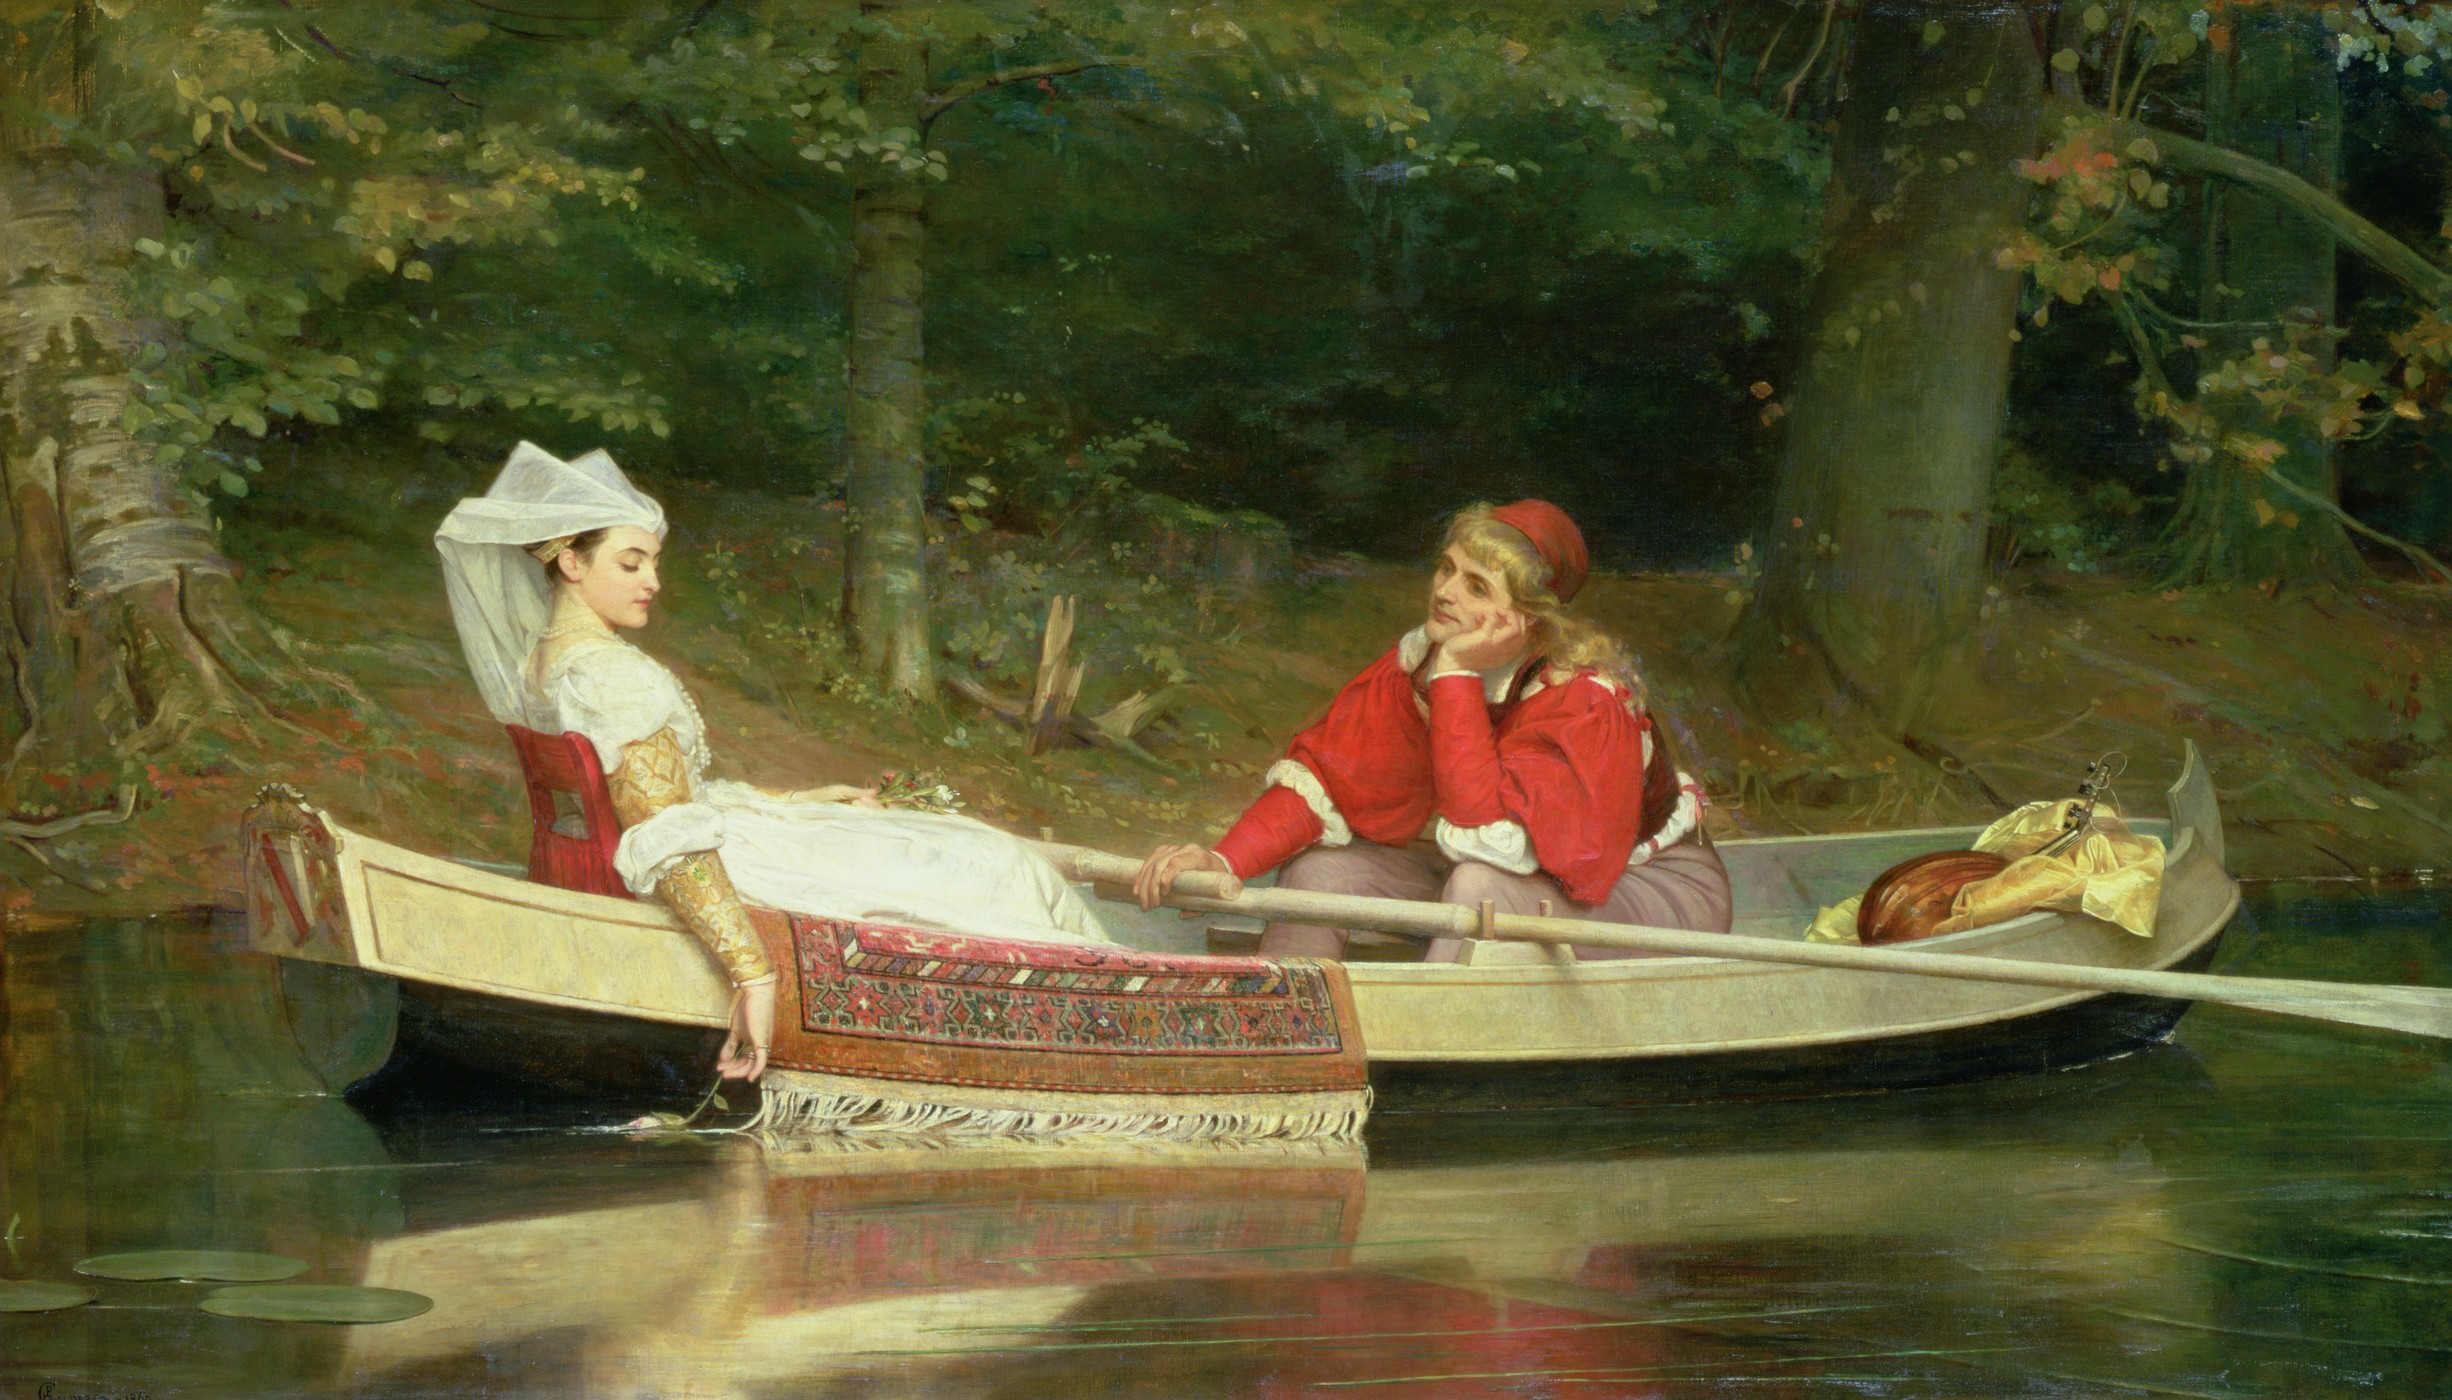 XKH141030 With The River, 1869 (oil on canvas); by Calderon, Philip Hermogenes (1833-98)